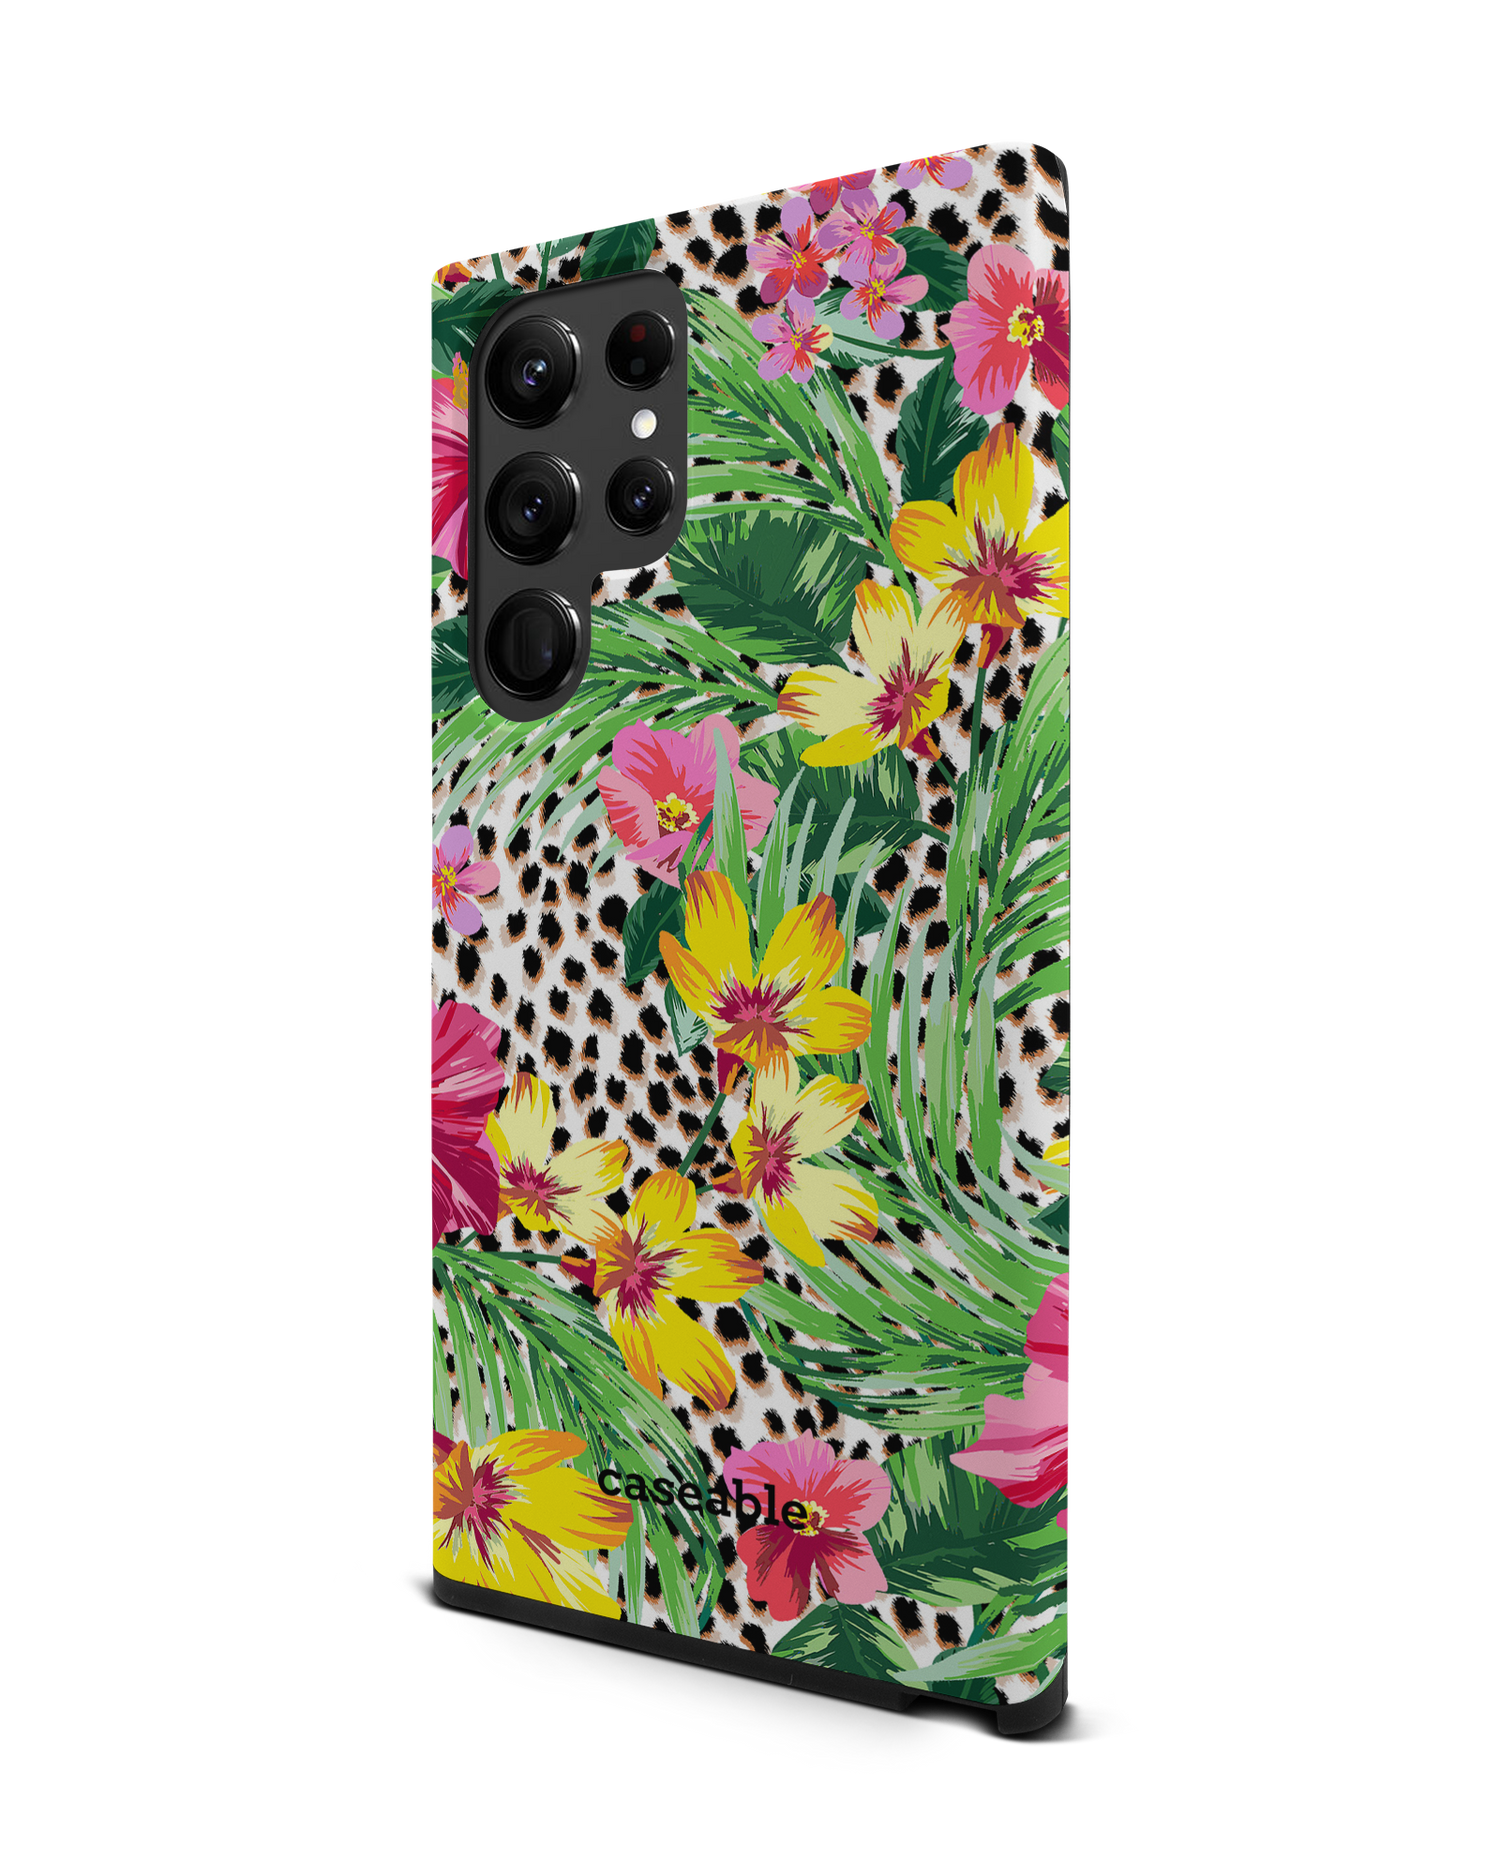 Tropical Cheetah Premium Phone Case Samsung Galaxy S22 Ultra 5G: View from the right side